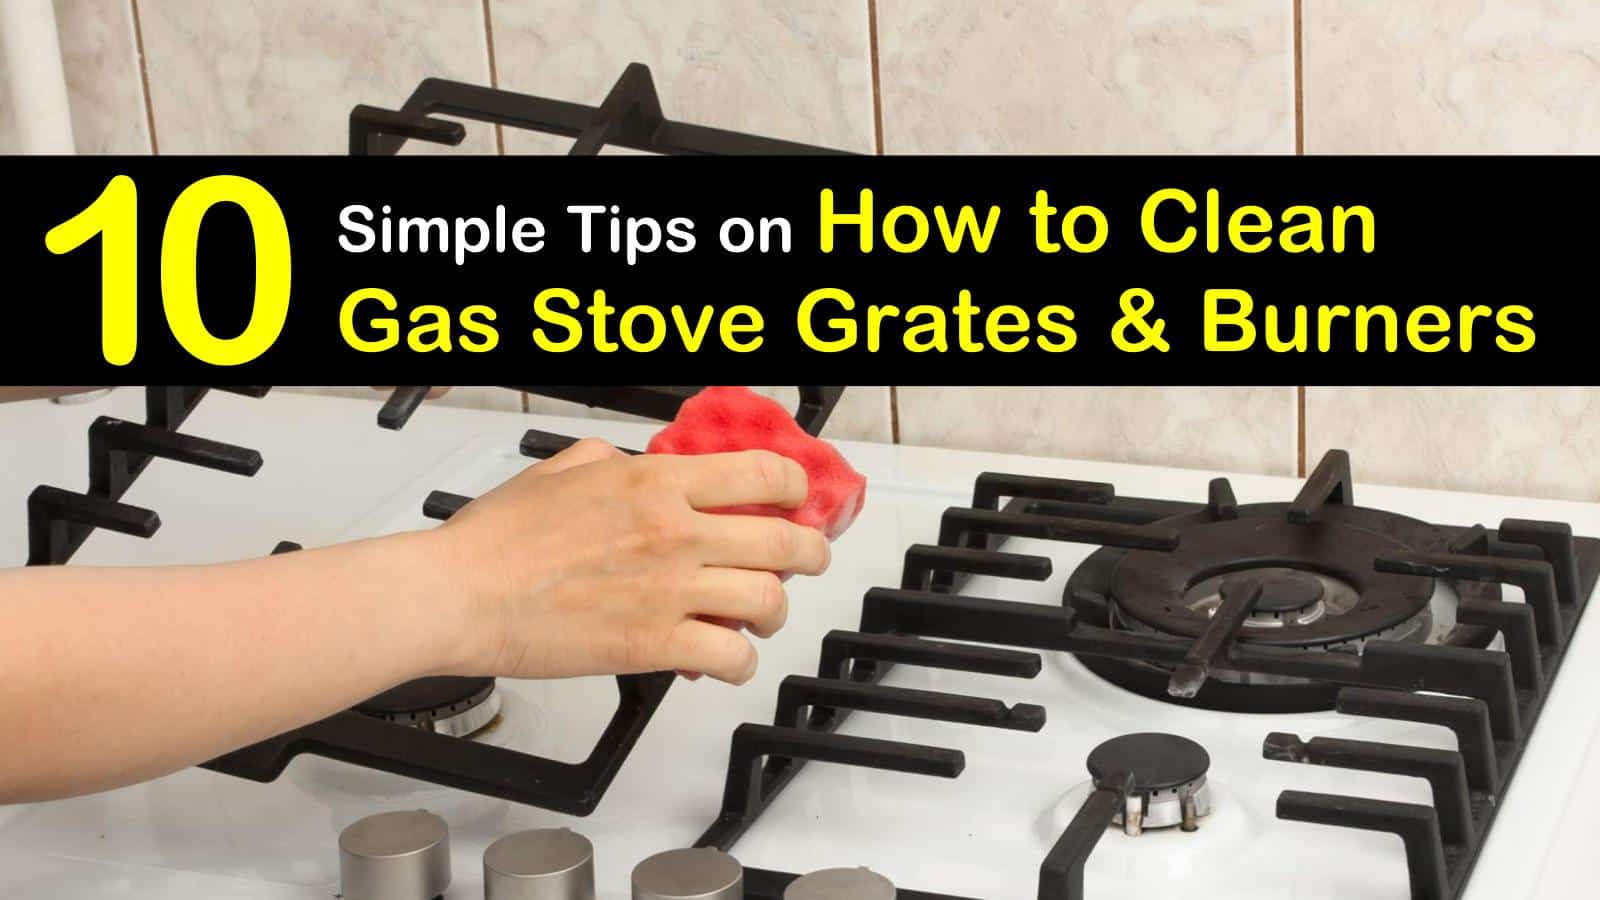 17 Simple Ways to Clean Gas Stove Grates